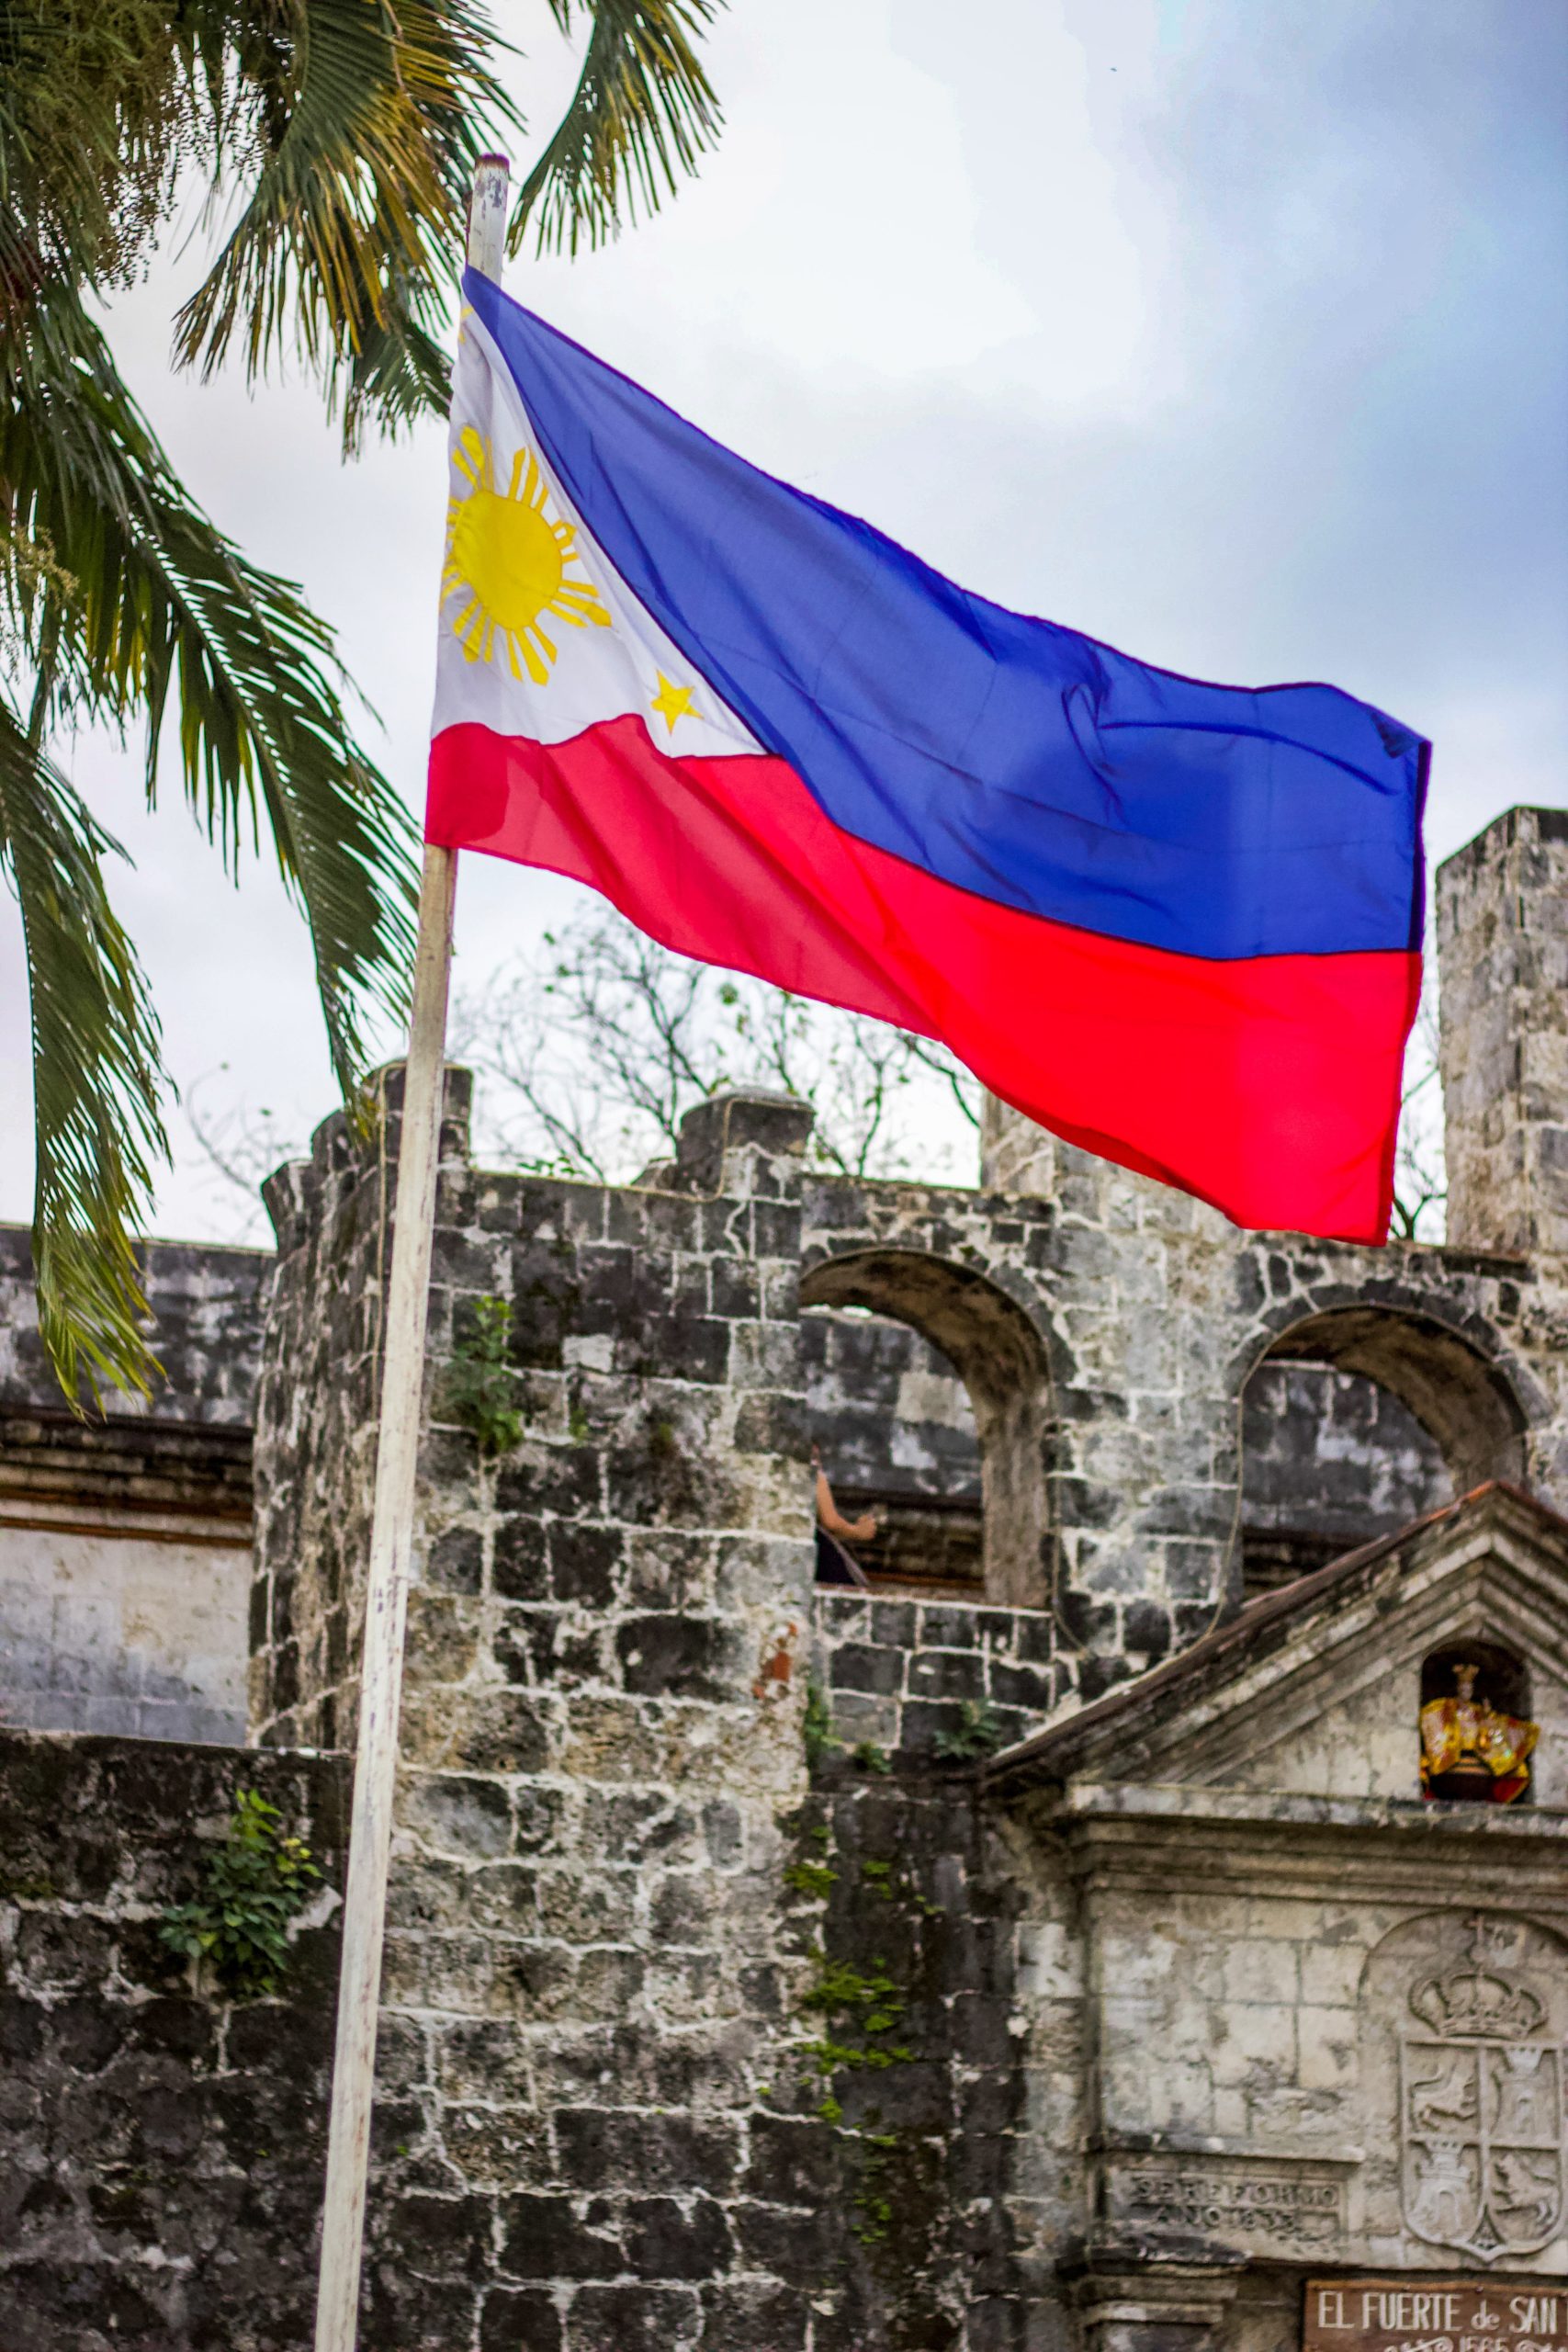 Identity Crisis: My Missionary Journey as a Filipino American in Postcolonial Philippines – Pt. 1